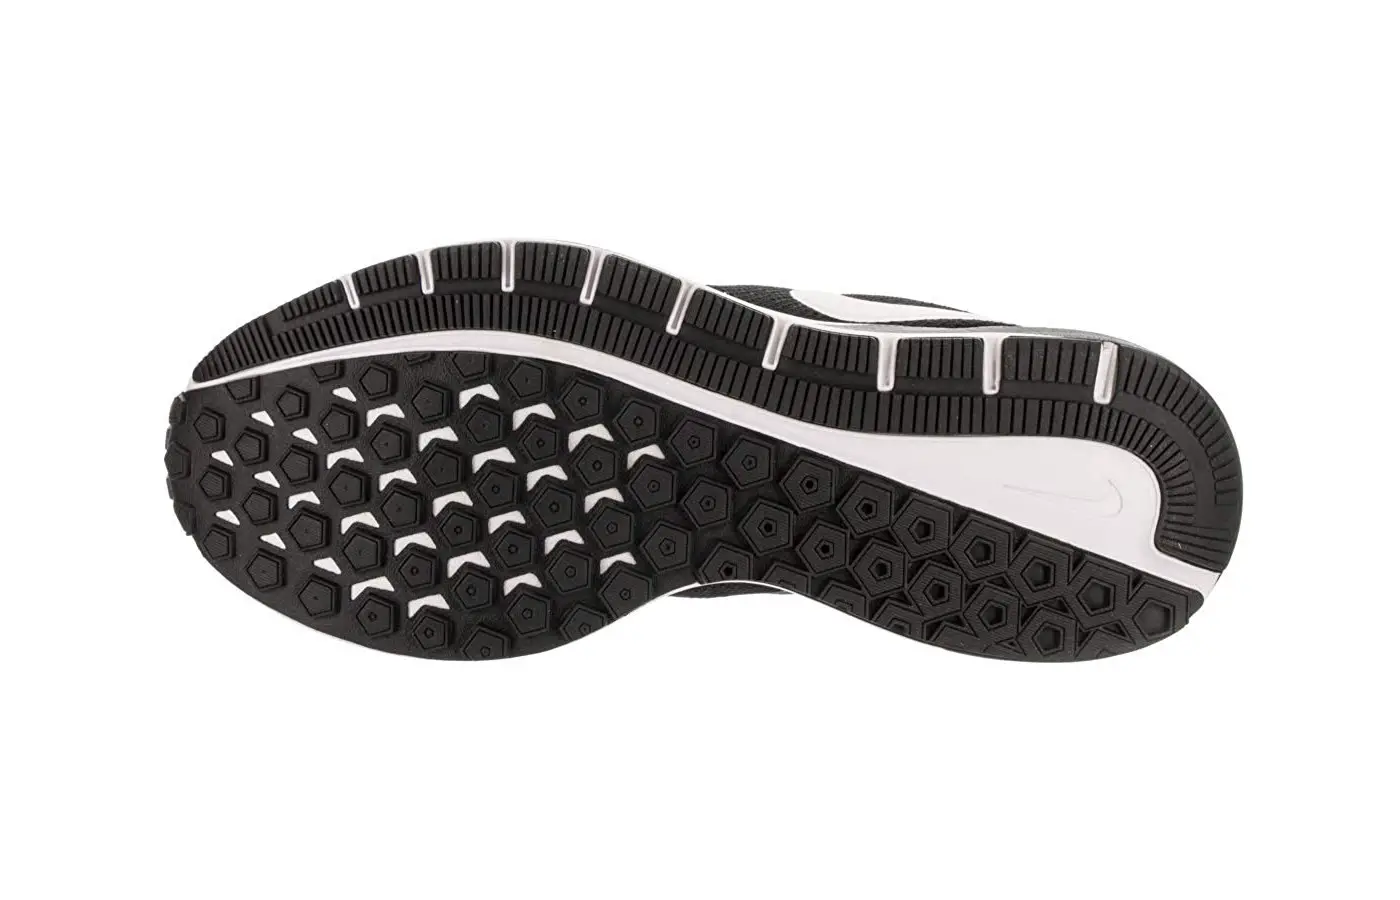 The outsole provides a lot of traction.